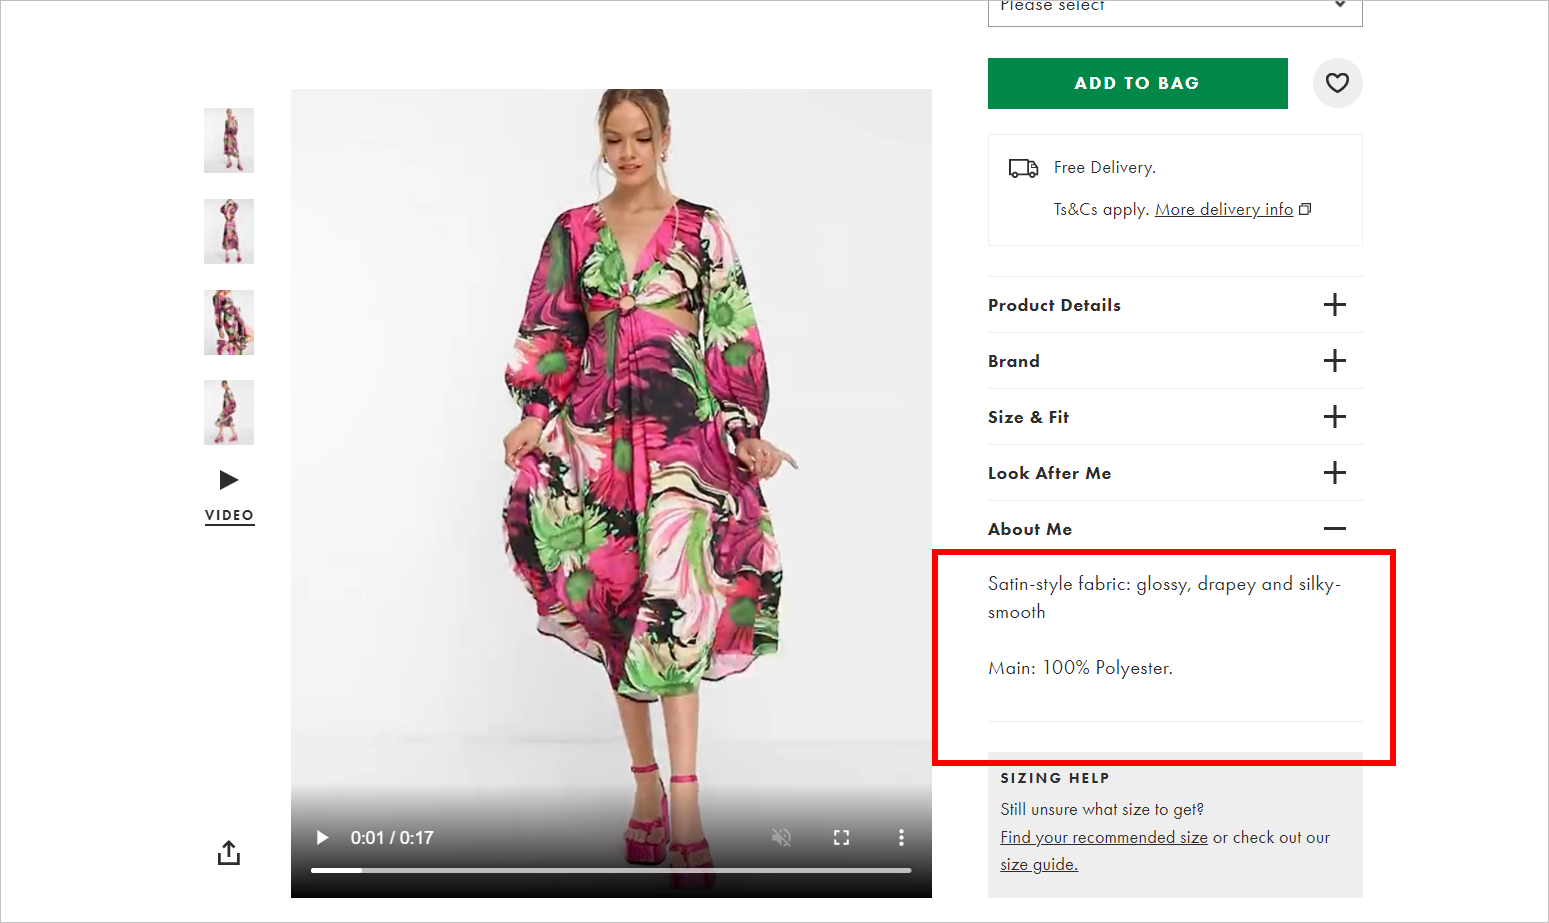 PDP with images and video on the left and CTA and product details on the right. The video is playing and shows a woman in a floral dress